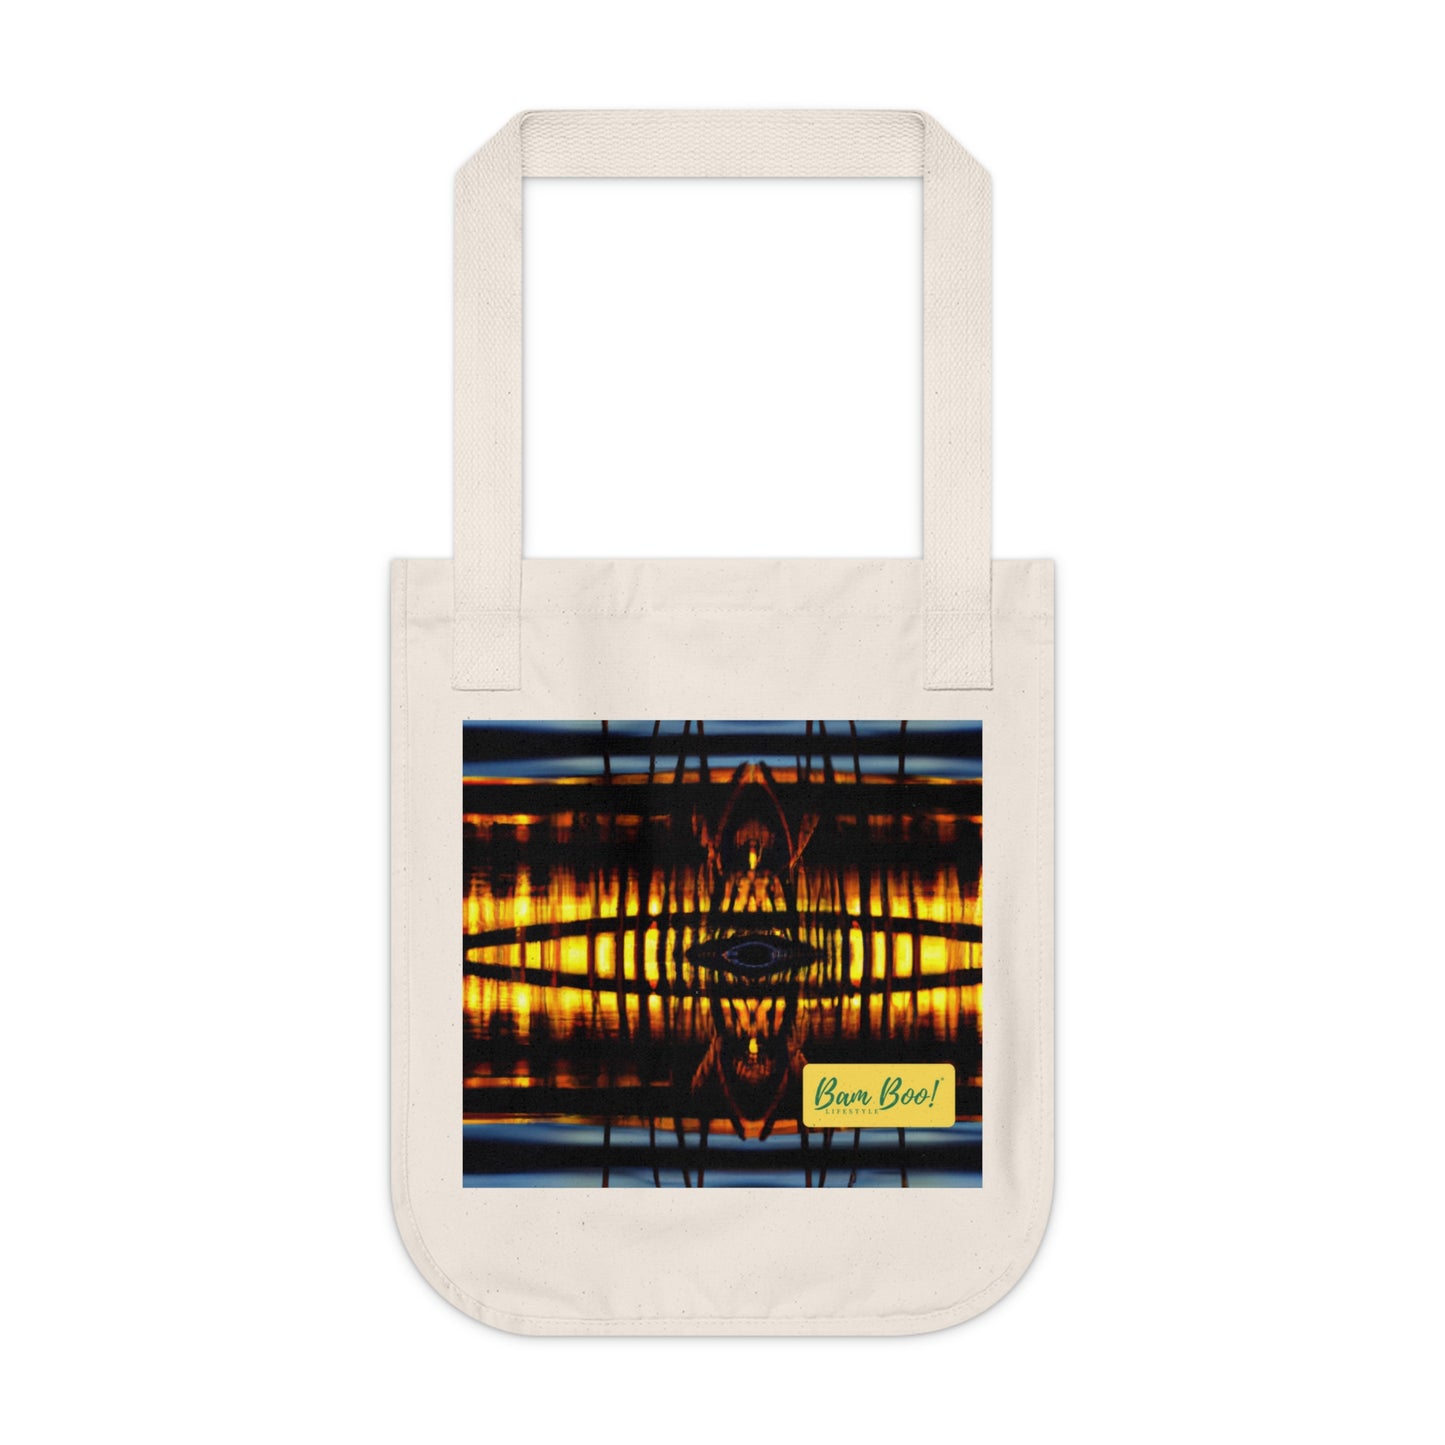 "Aquatic Reflections: An Abstract Digital Artwork" - Bam Boo! Lifestyle Eco-friendly Tote Bag